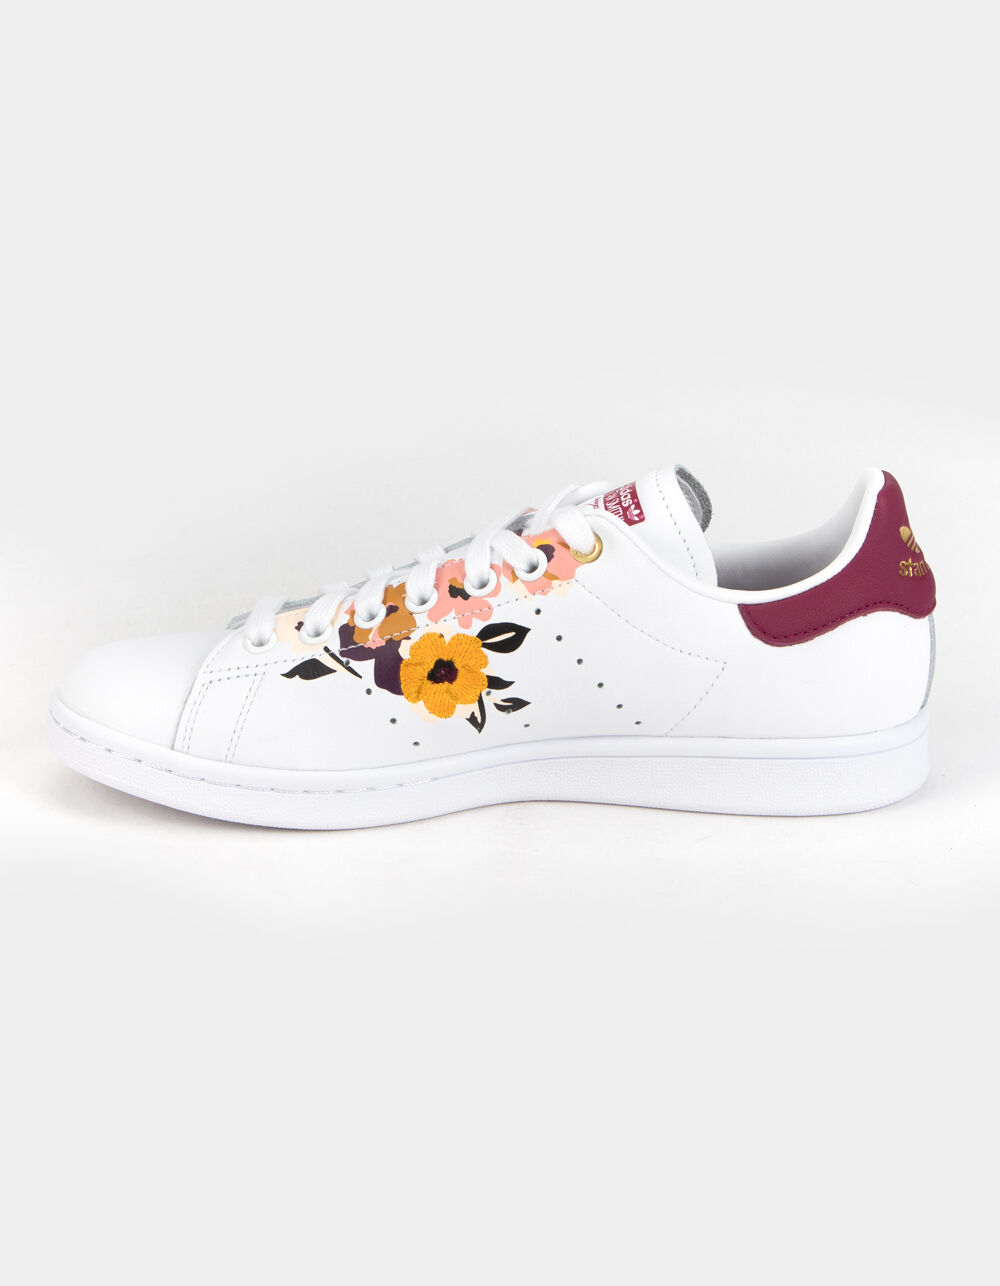 Adidas Women's Stan Smith Floral Print Sneakers